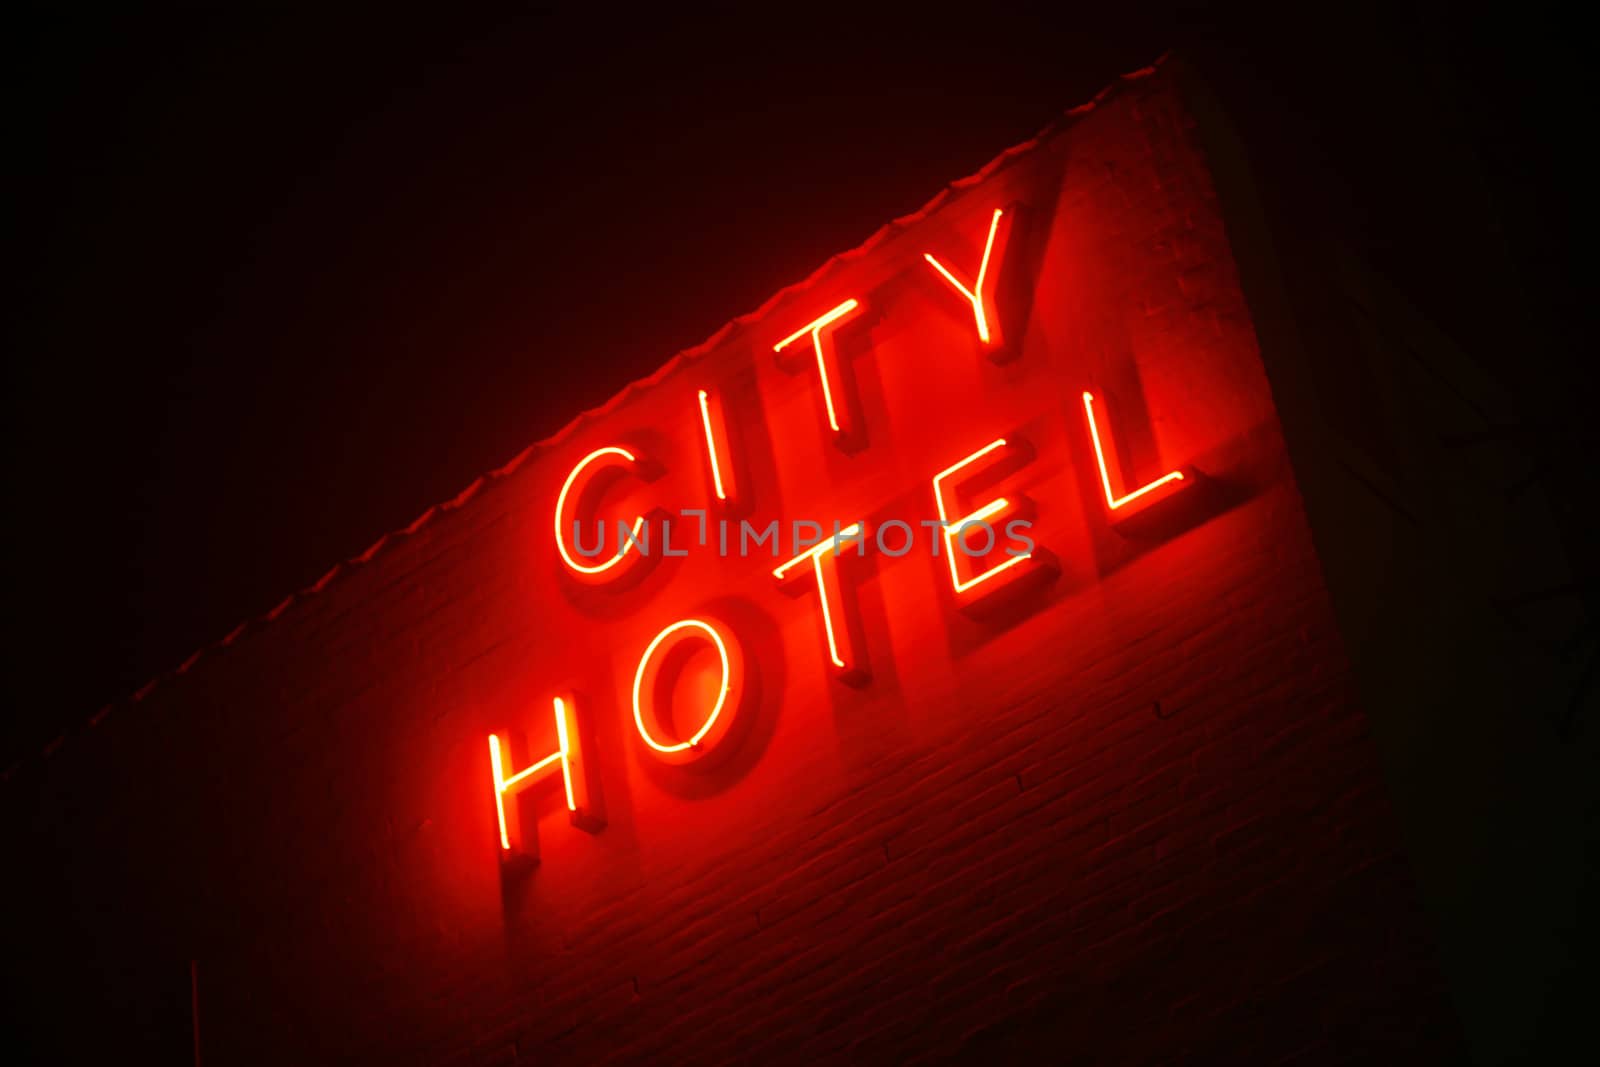 Foggy evening with neon sign saying City Hotel.